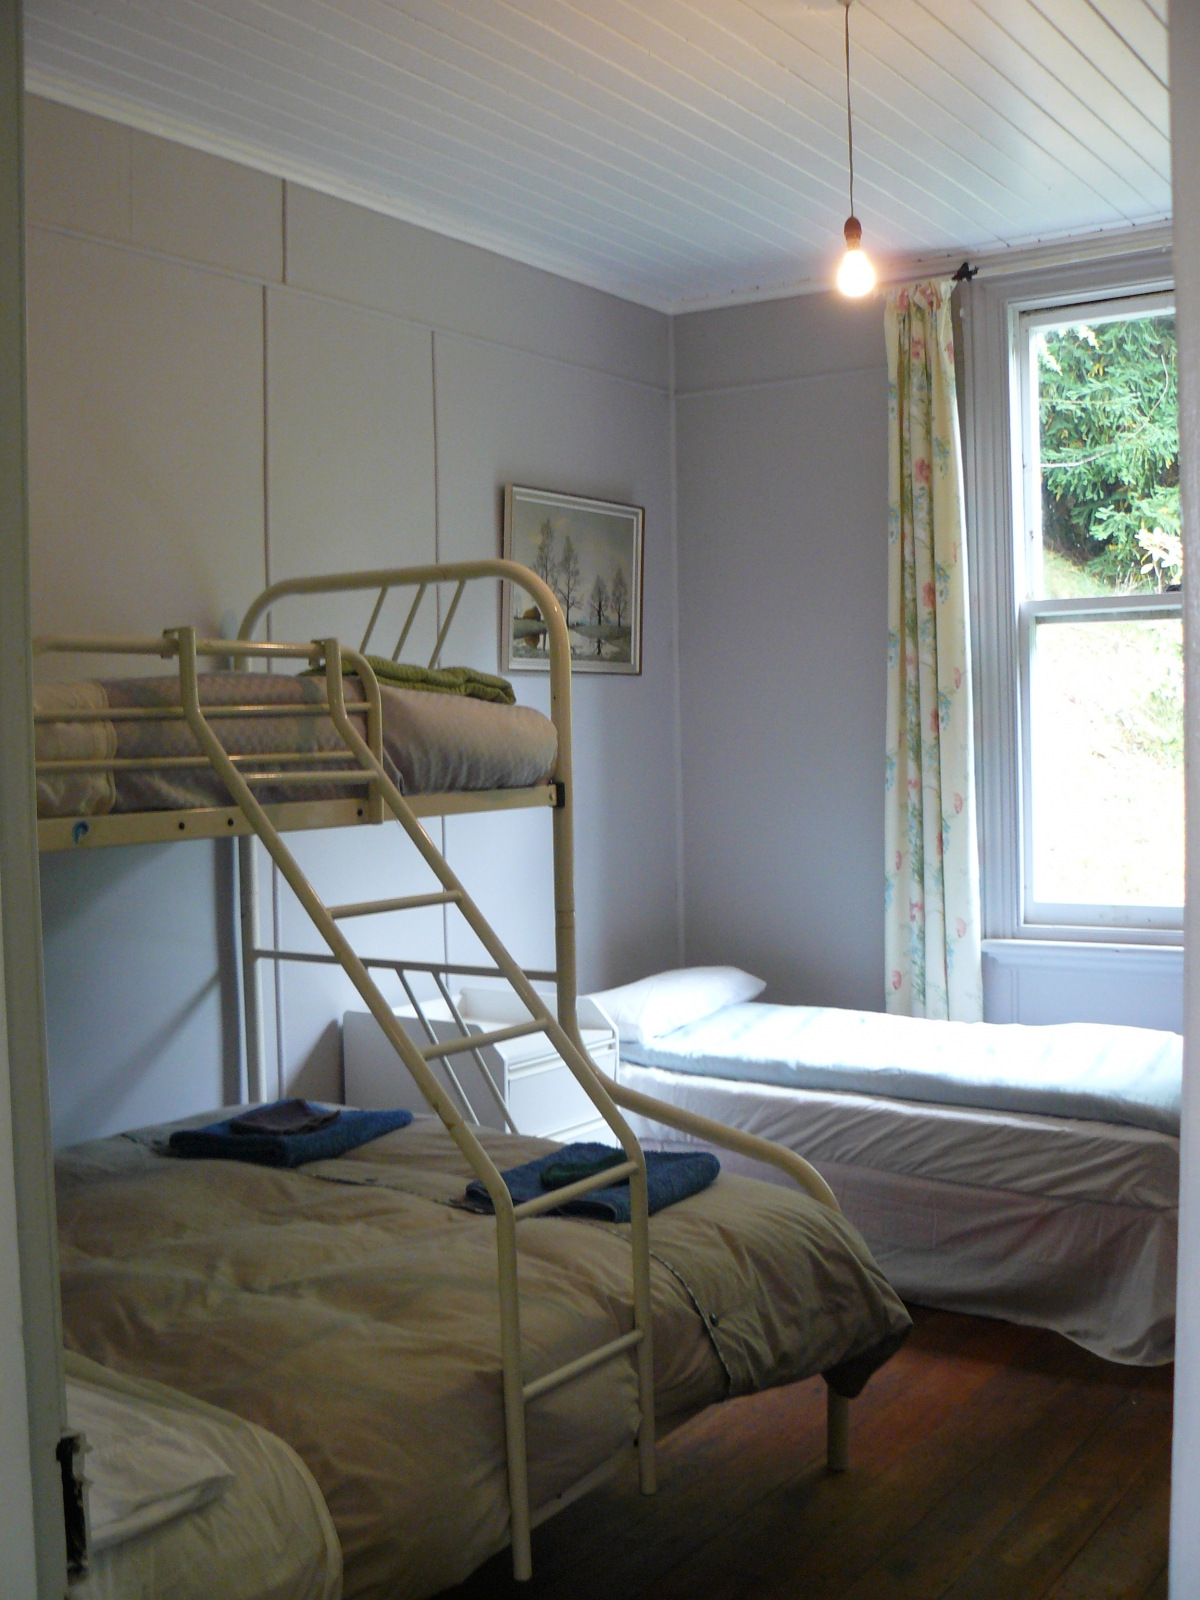 Photo of property: bedroom with double bunk